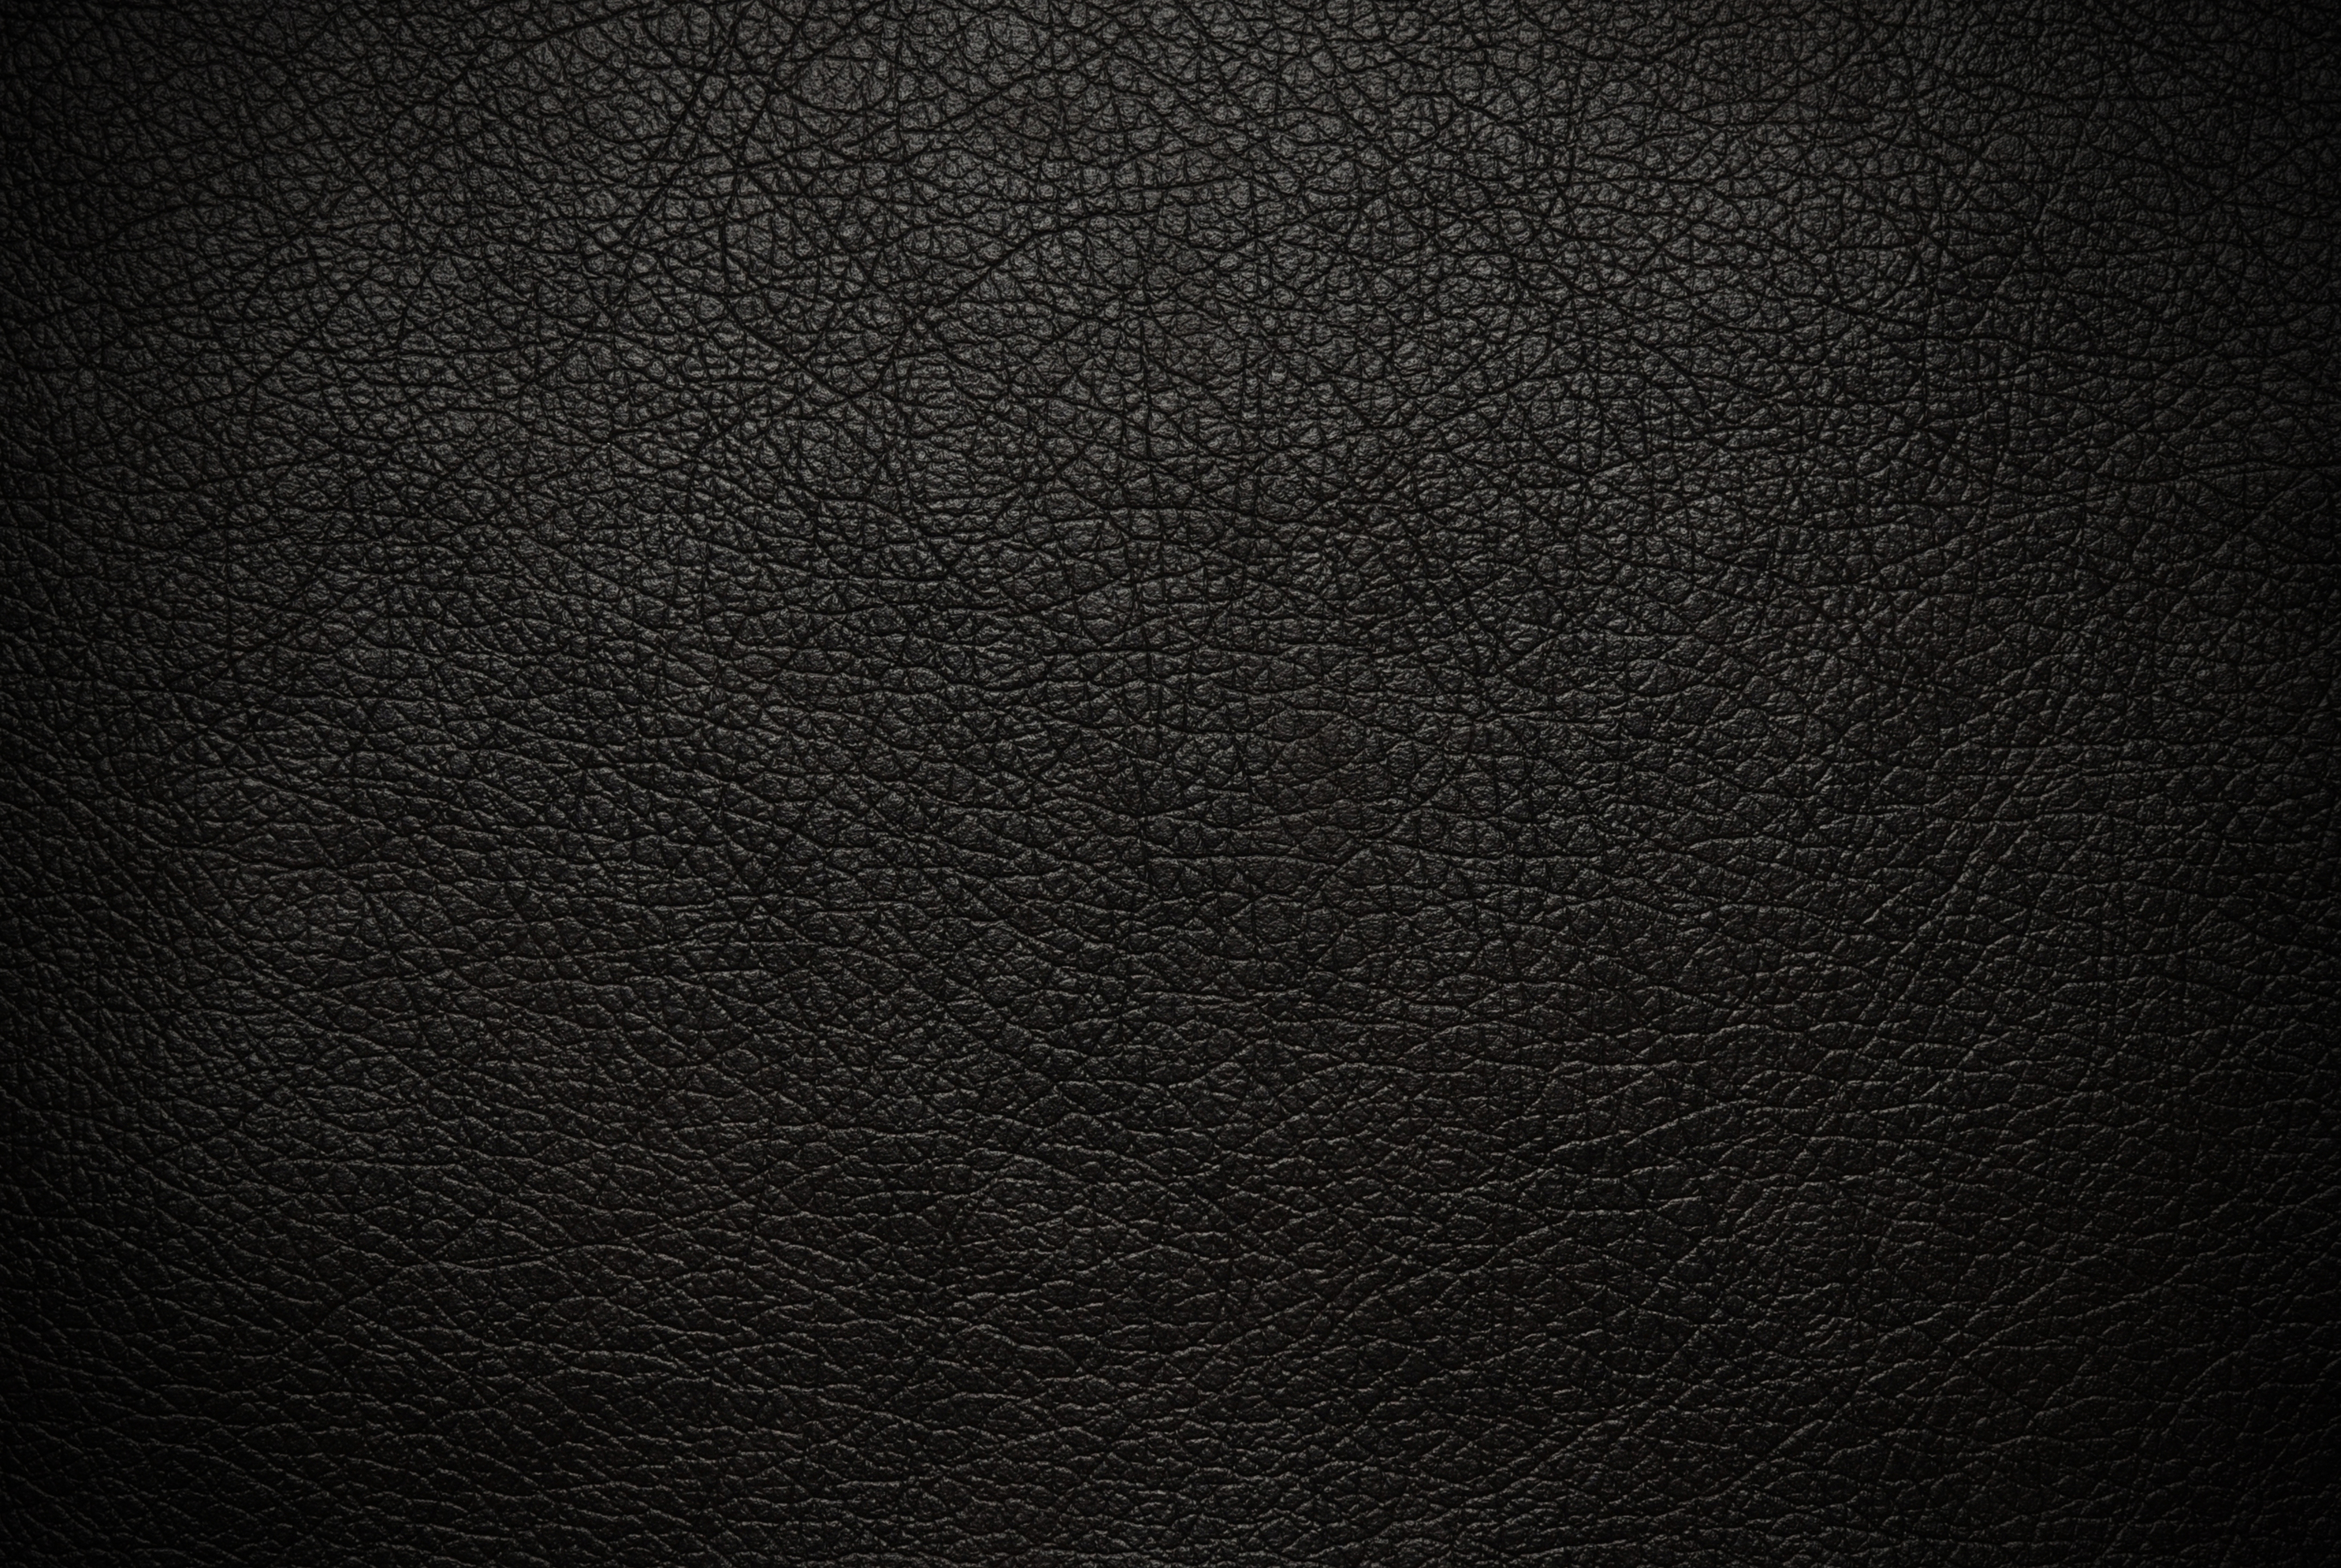 4K wallpaper   Textures   black background texture leather cracked